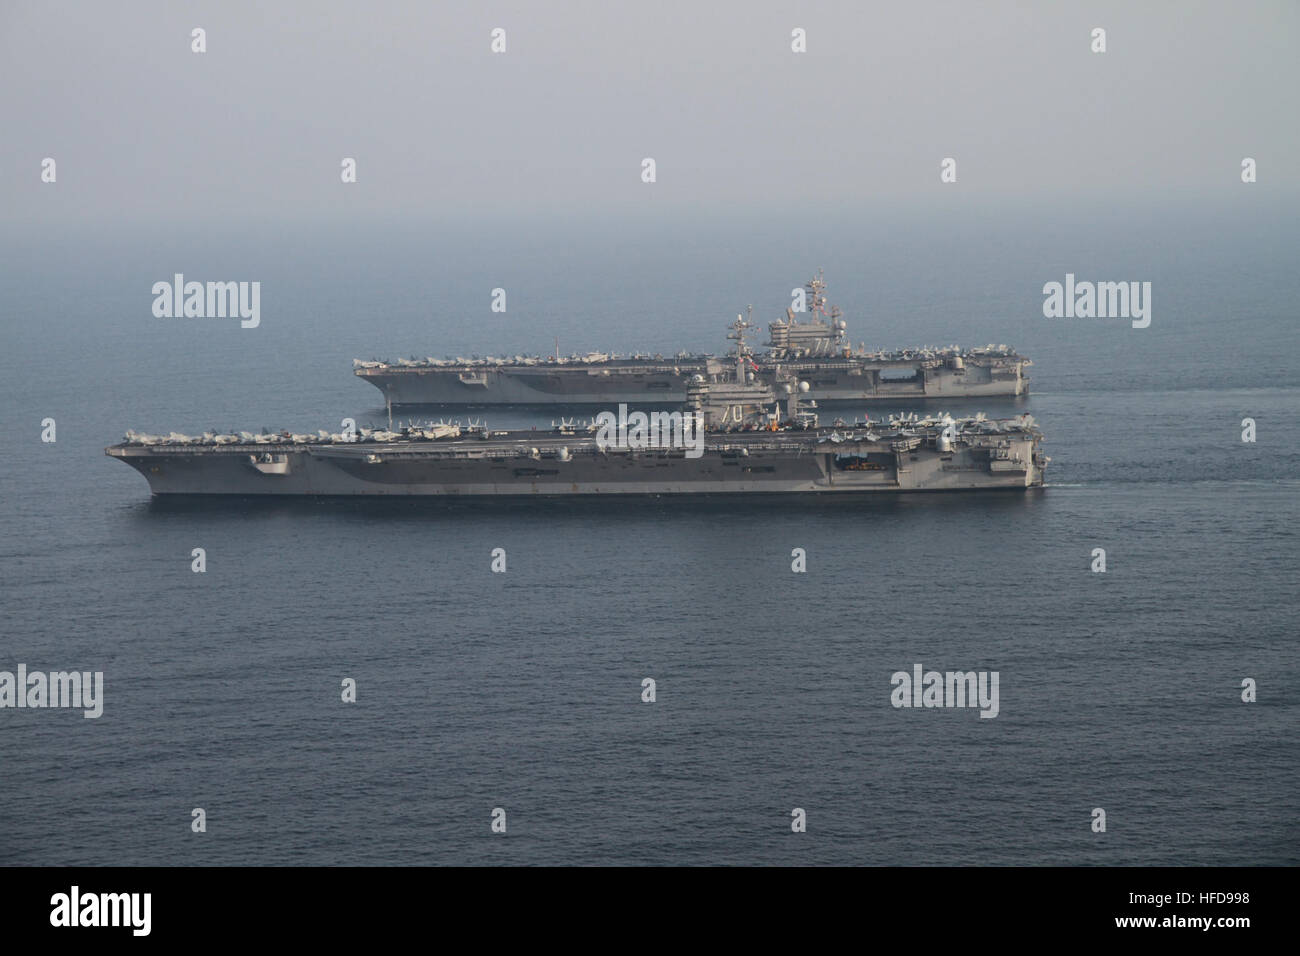 The aircraft carrier USS Carl Vinson (CVN 70), foreground, relieves the aircraft carrier USS George H.W. Bush (CVN 77) in the Persian Gulf Oct. 18, 2014, during Inherent Resolve. The George H.W. Bush was to leave the U.S. 5th Fleet area of responsibility for its home port in Norfolk, Va. President Barack Obama authorized humanitarian aid deliveries to Iraq as well as targeted airstrikes to protect U.S. personnel from extremists known as the Islamic State in Iraq and the Levant. U.S. Central Command directed the operations. (U.S. Navy photo by Lt. Juan D. Guerra/Released) The aircraft carrier U Stock Photo